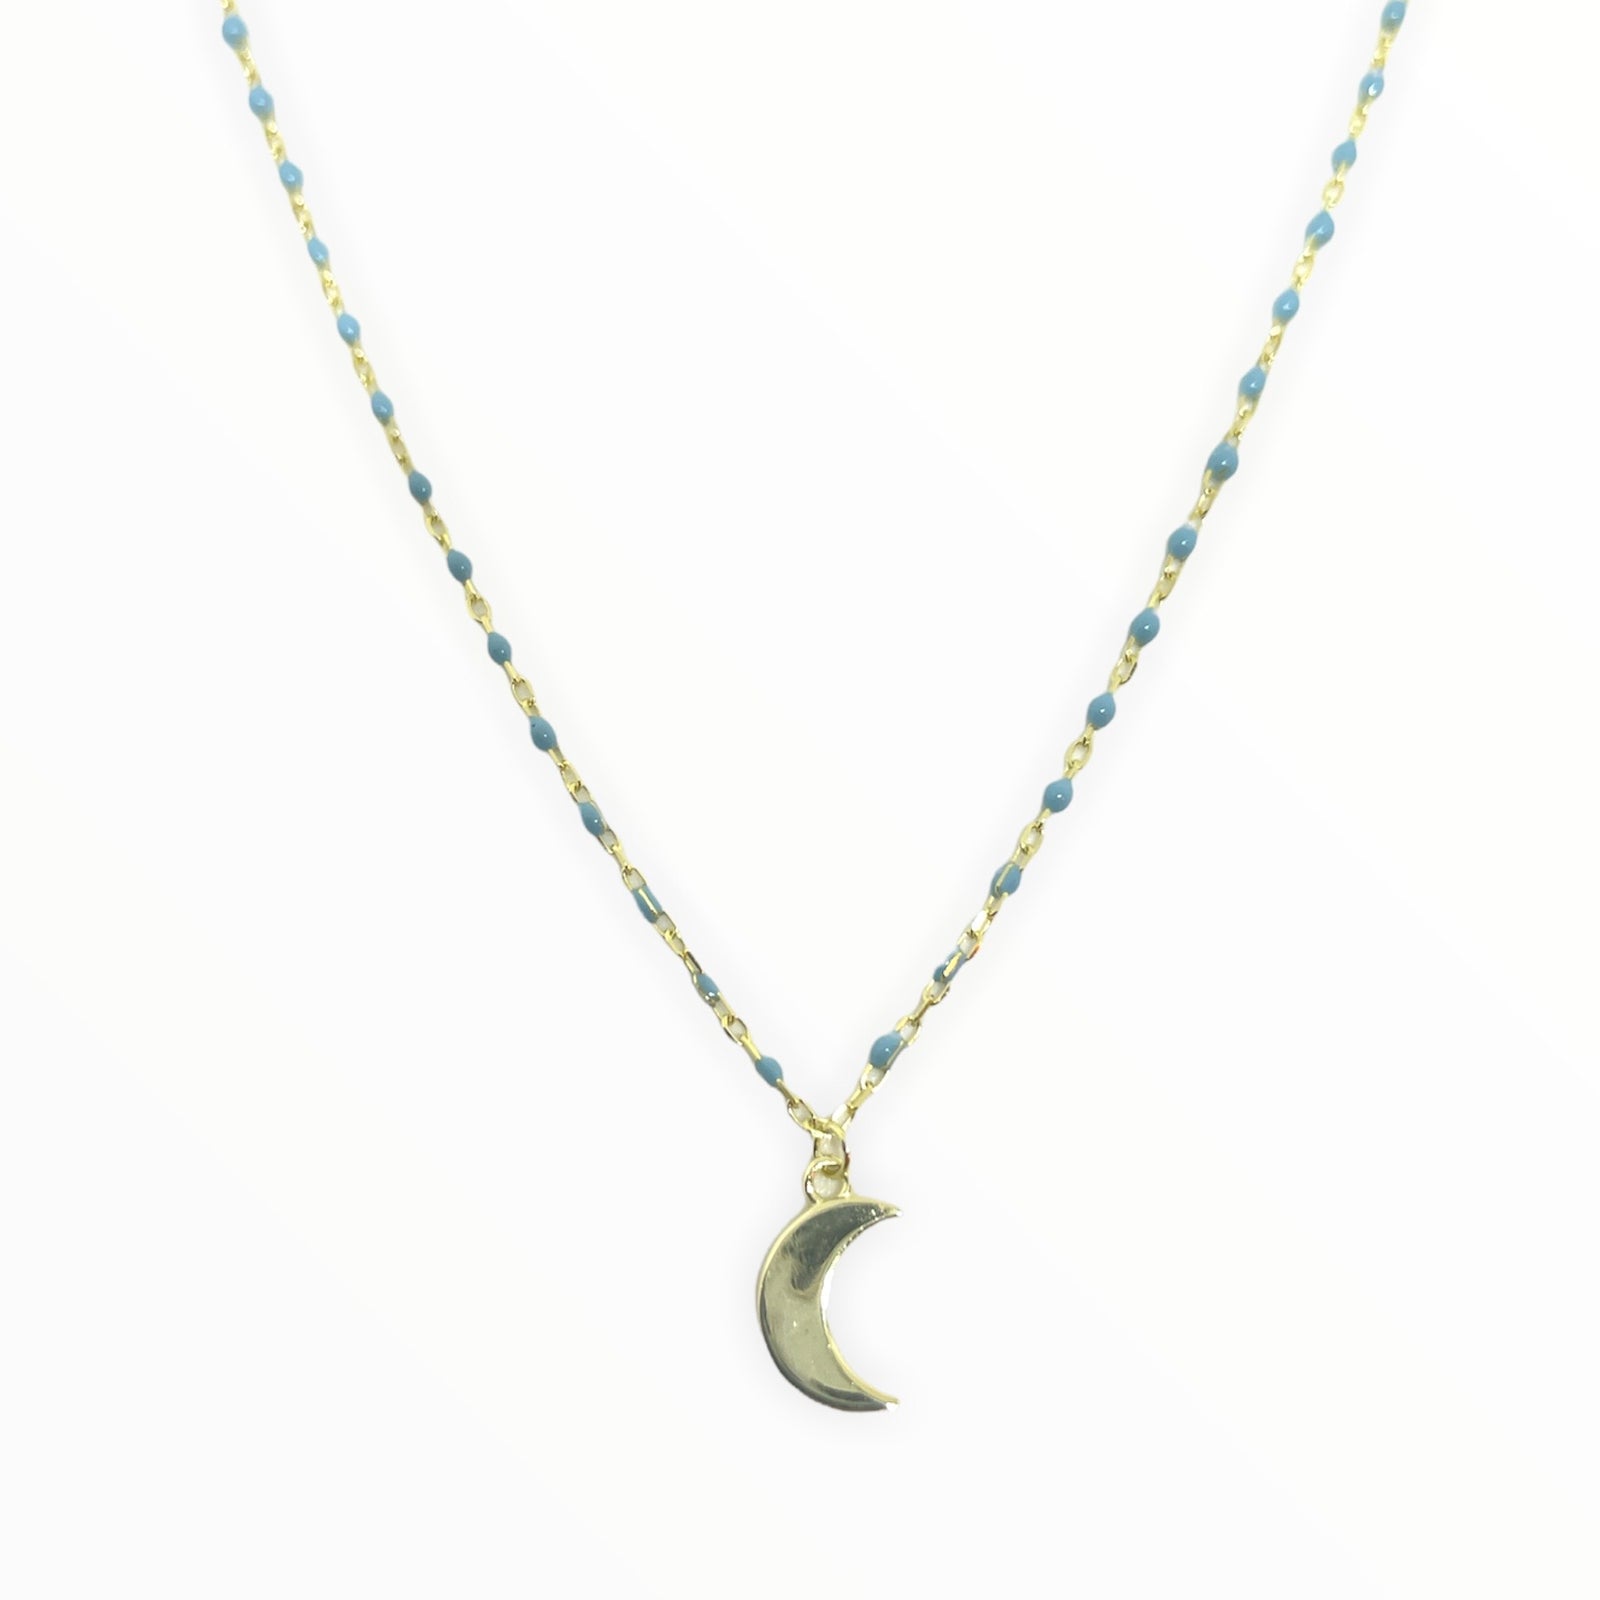 Turquoise moon necklace